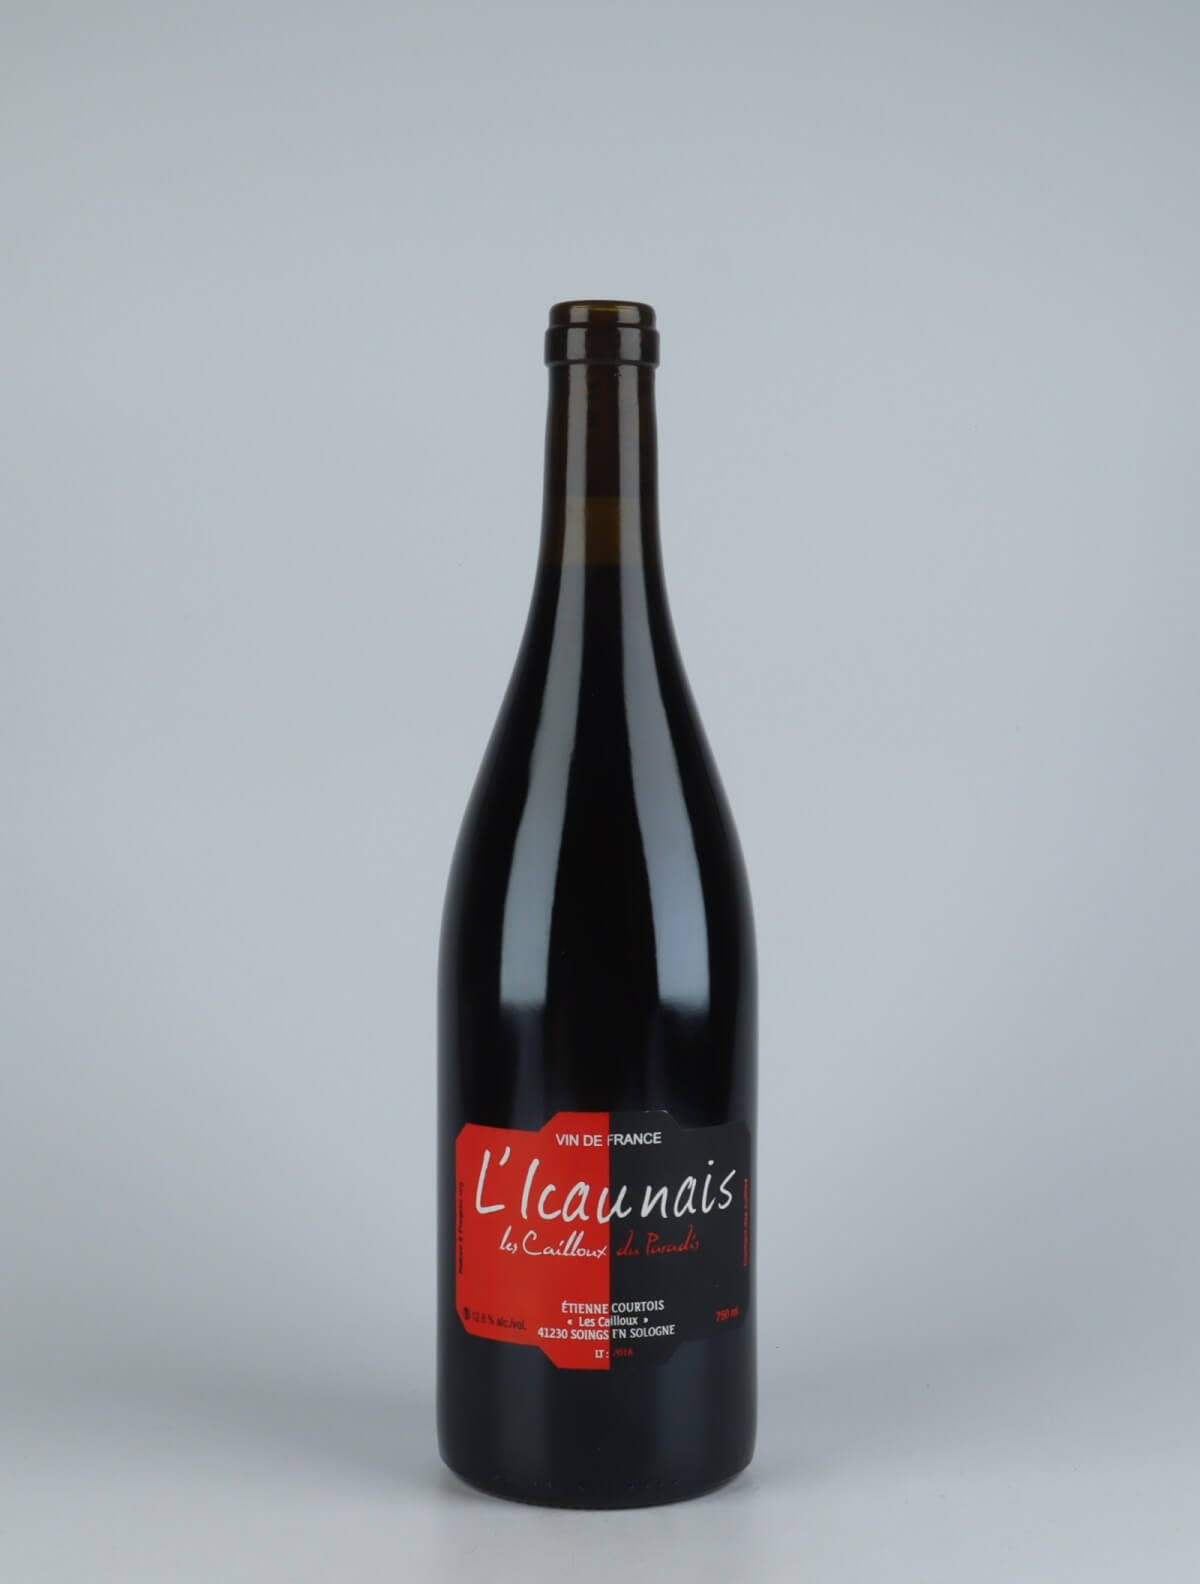 A bottle 2018 L'Icaunais Red wine from Etienne Courtois, Loire in France